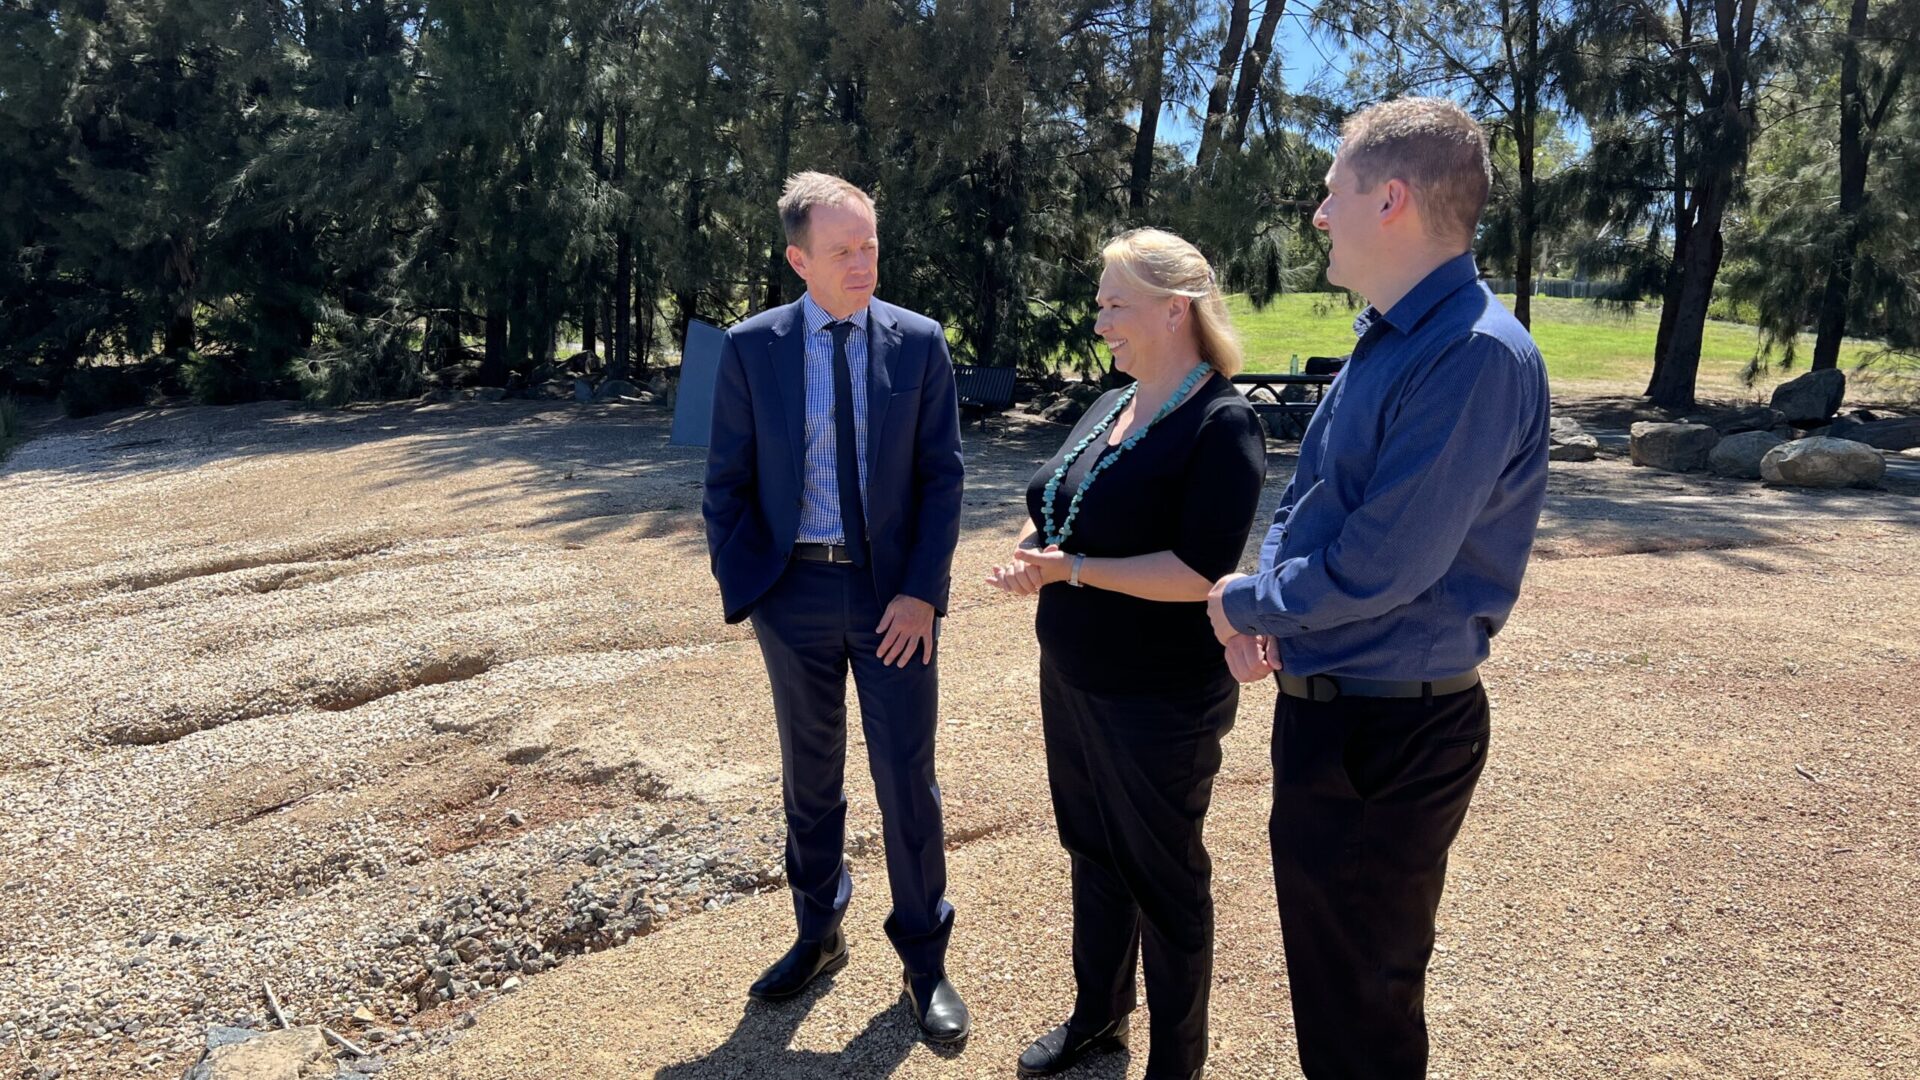 Shane Rattenbury MLA, Dr. Siwan Lovett and Andy Lowes stand on the banks of Lake Burley Griffin.